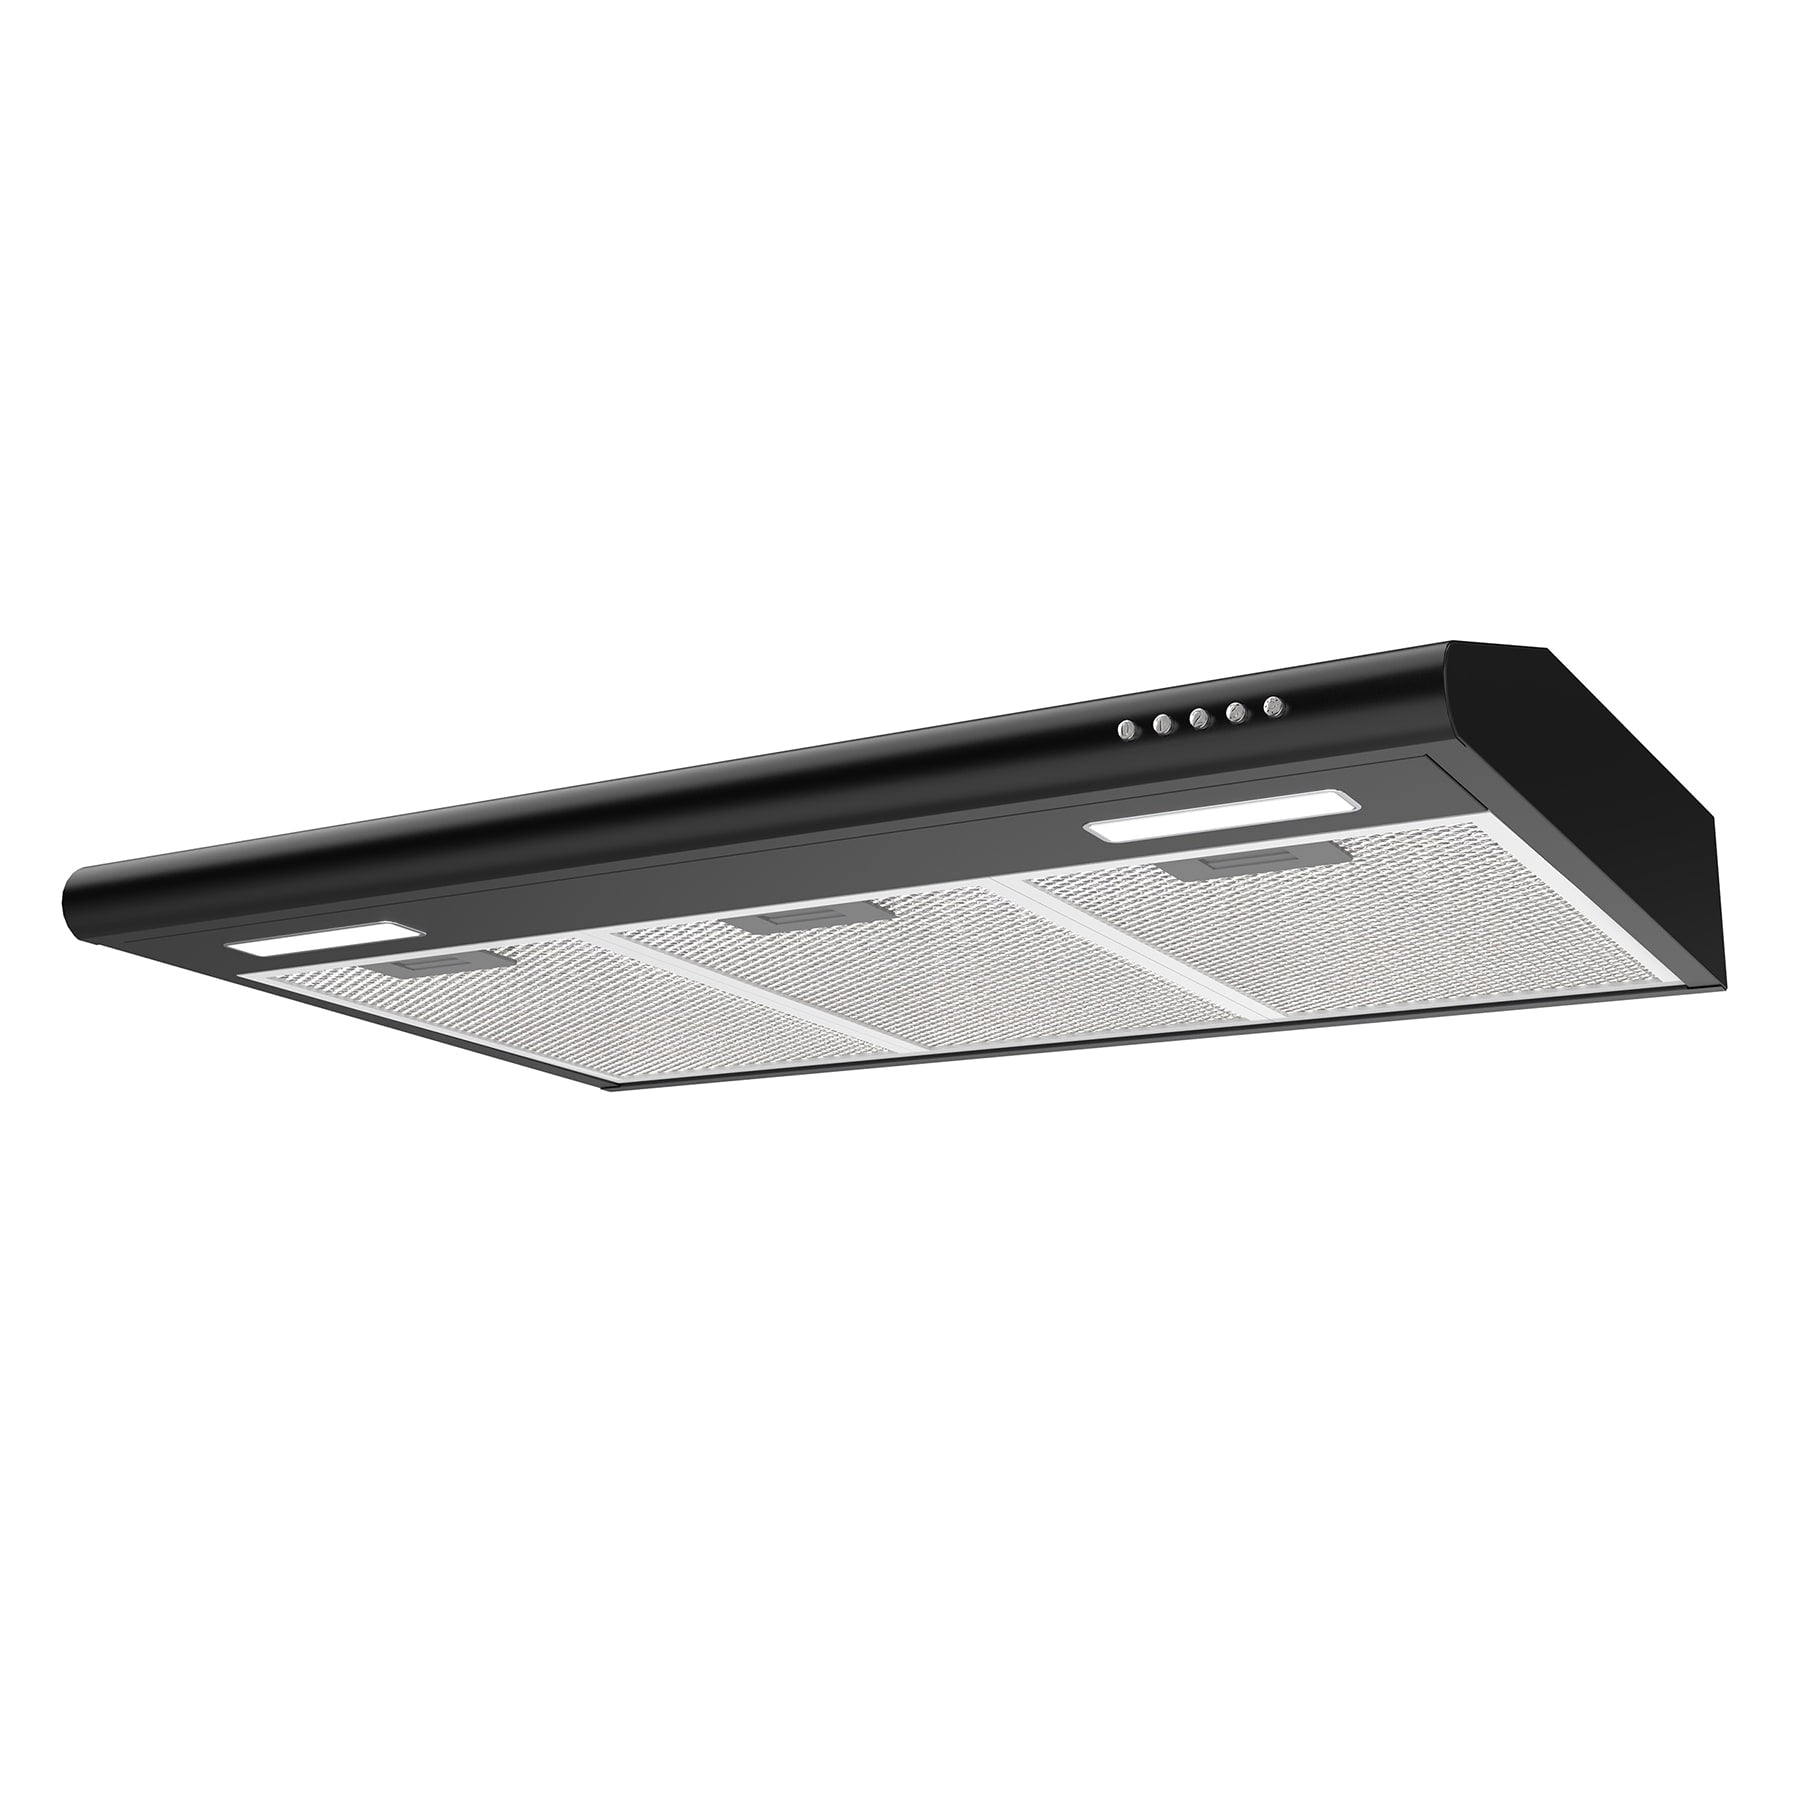 CIARRA AWS75918B Range Hood 30 inch Under Cabinet, Slim Vent Hood with 3  Speed Exhaust Fan, Push Button Control, Ducted and Ductless Convertible